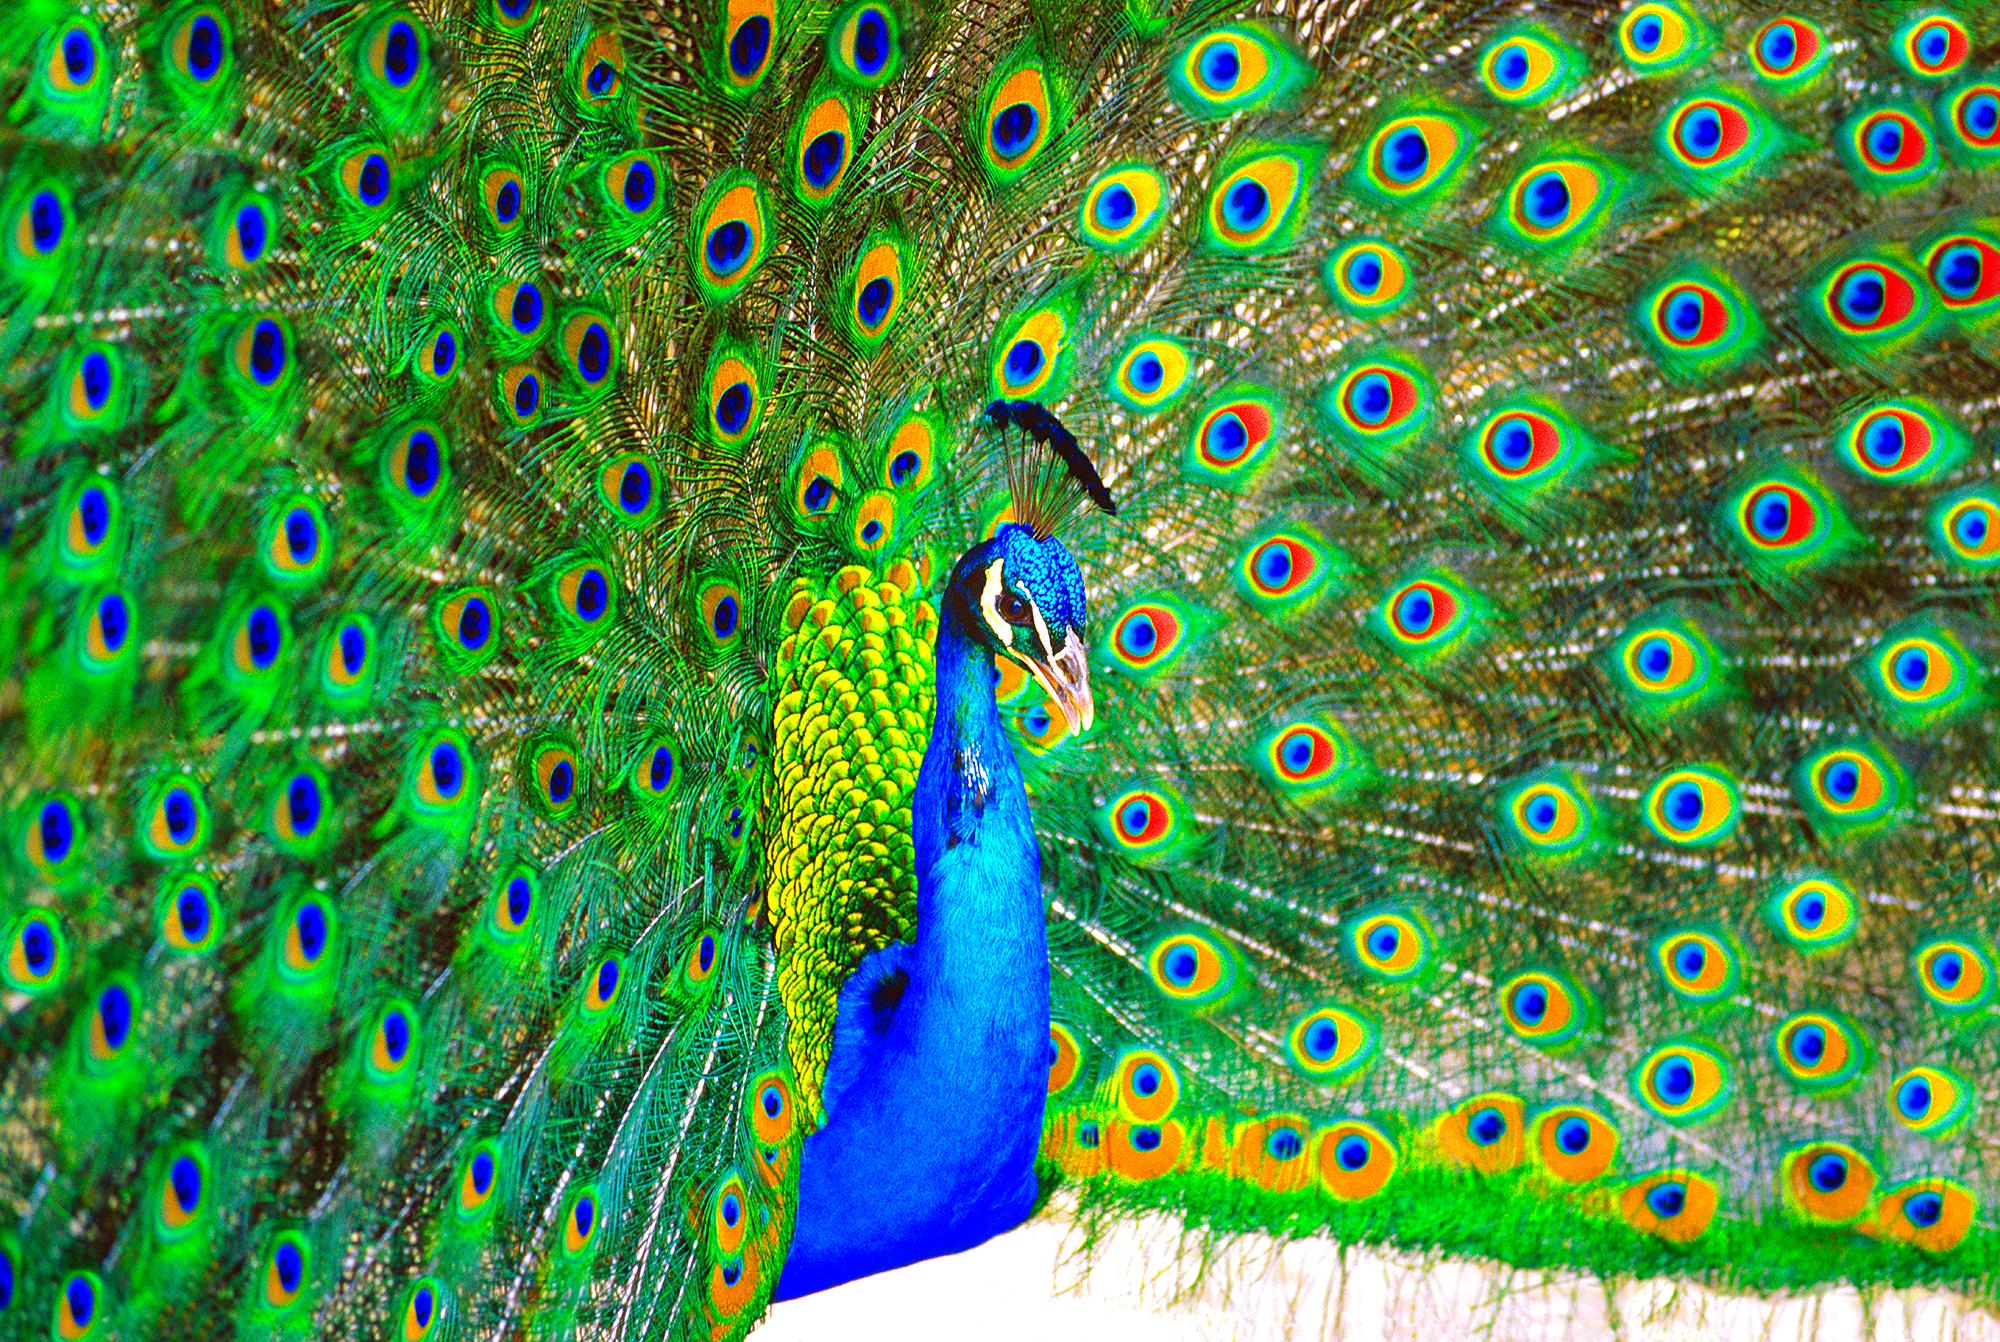 Mitchell Funk Abstract Photograph - Peacock Displaying Blue and Green Plumage